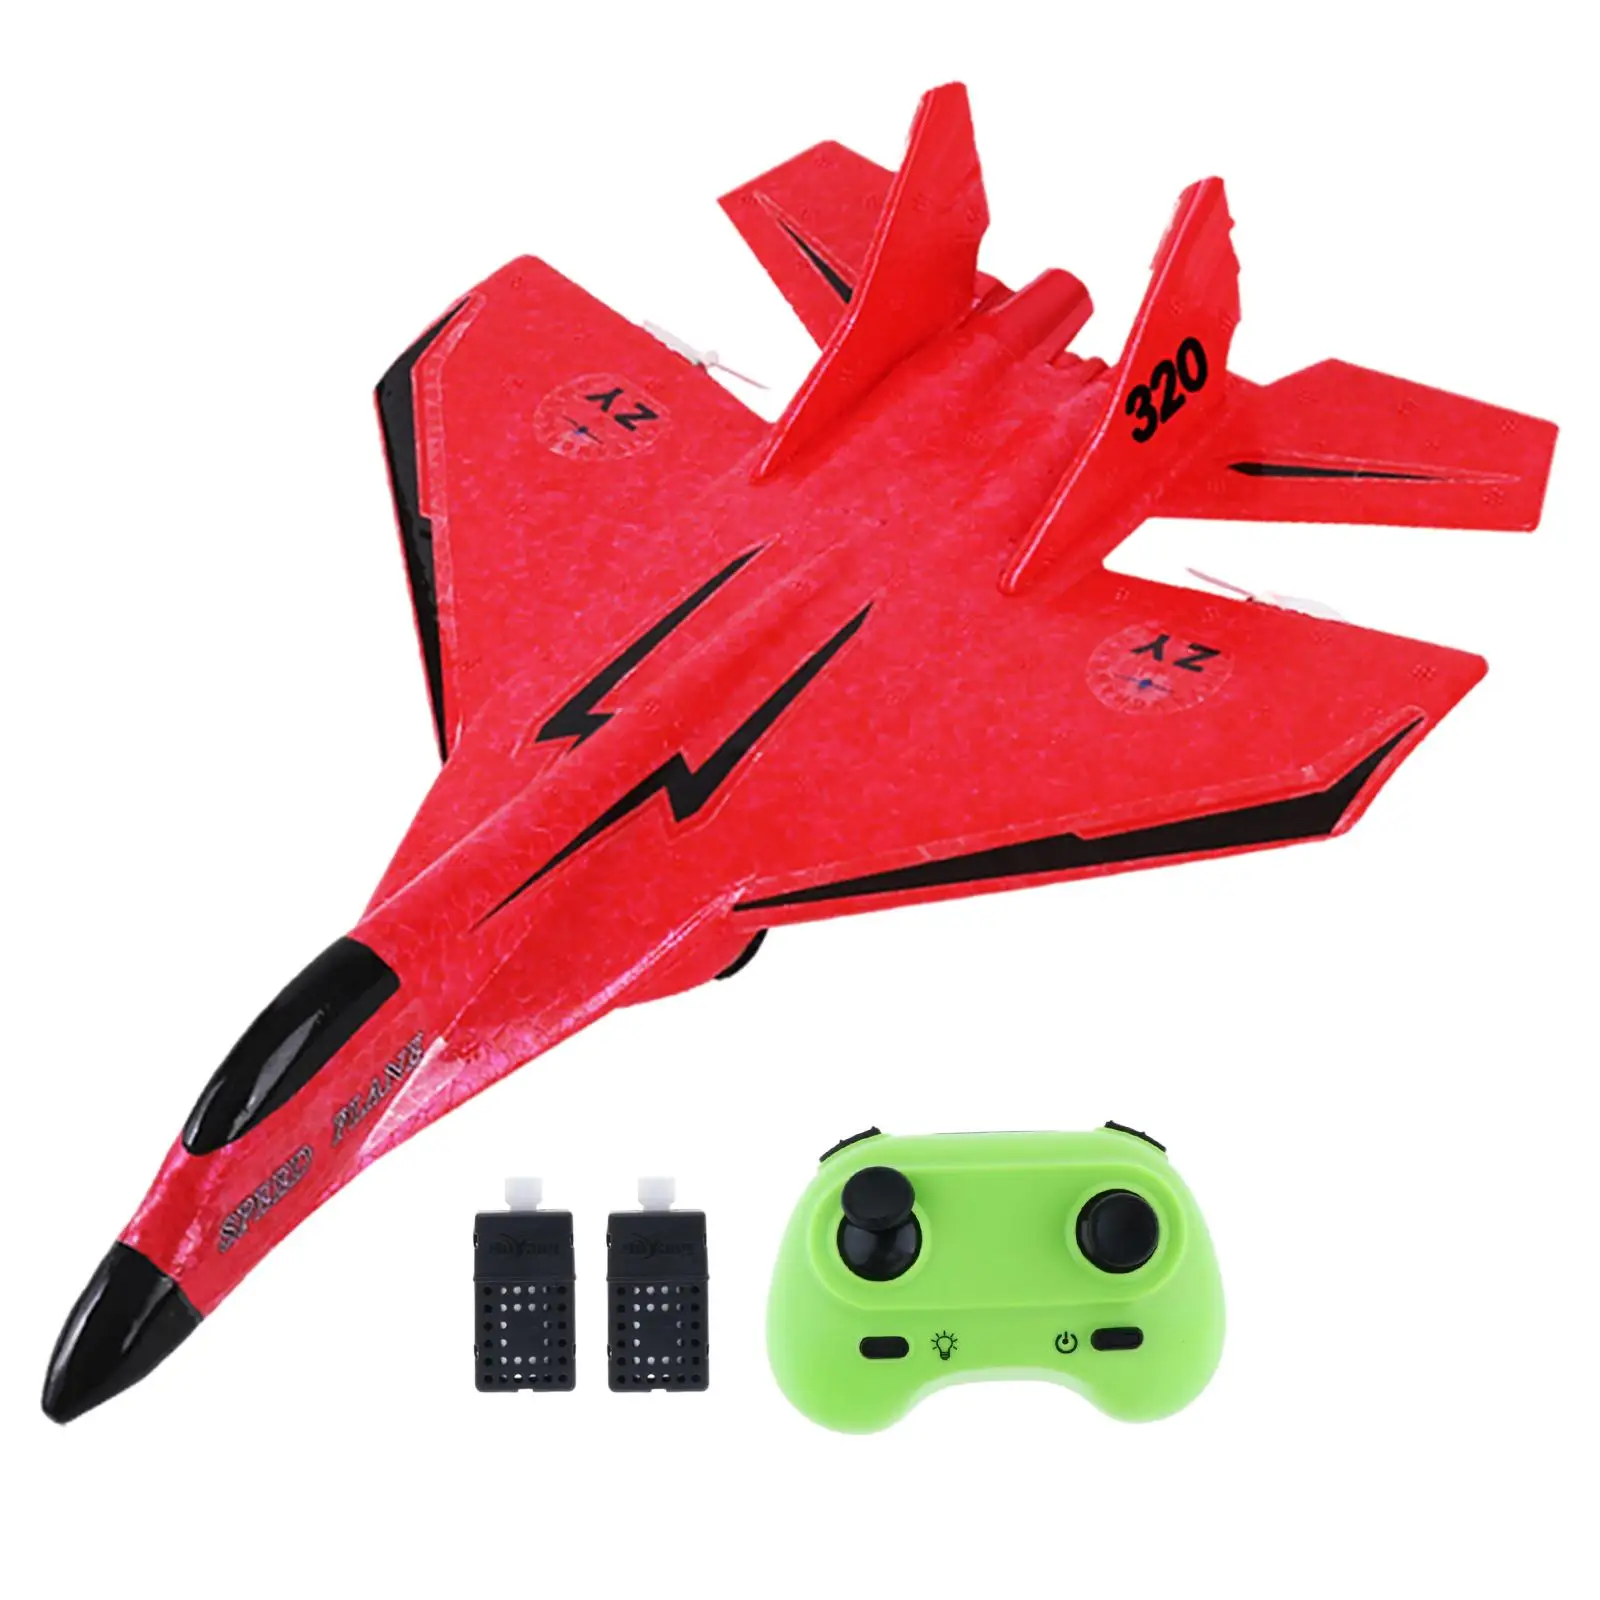 

2 CH RC Plane to Fly Outdoor Flighting Toys Ready to Fly Glider Foam RC Airplane for Beginner Adults Kids Boys Girls